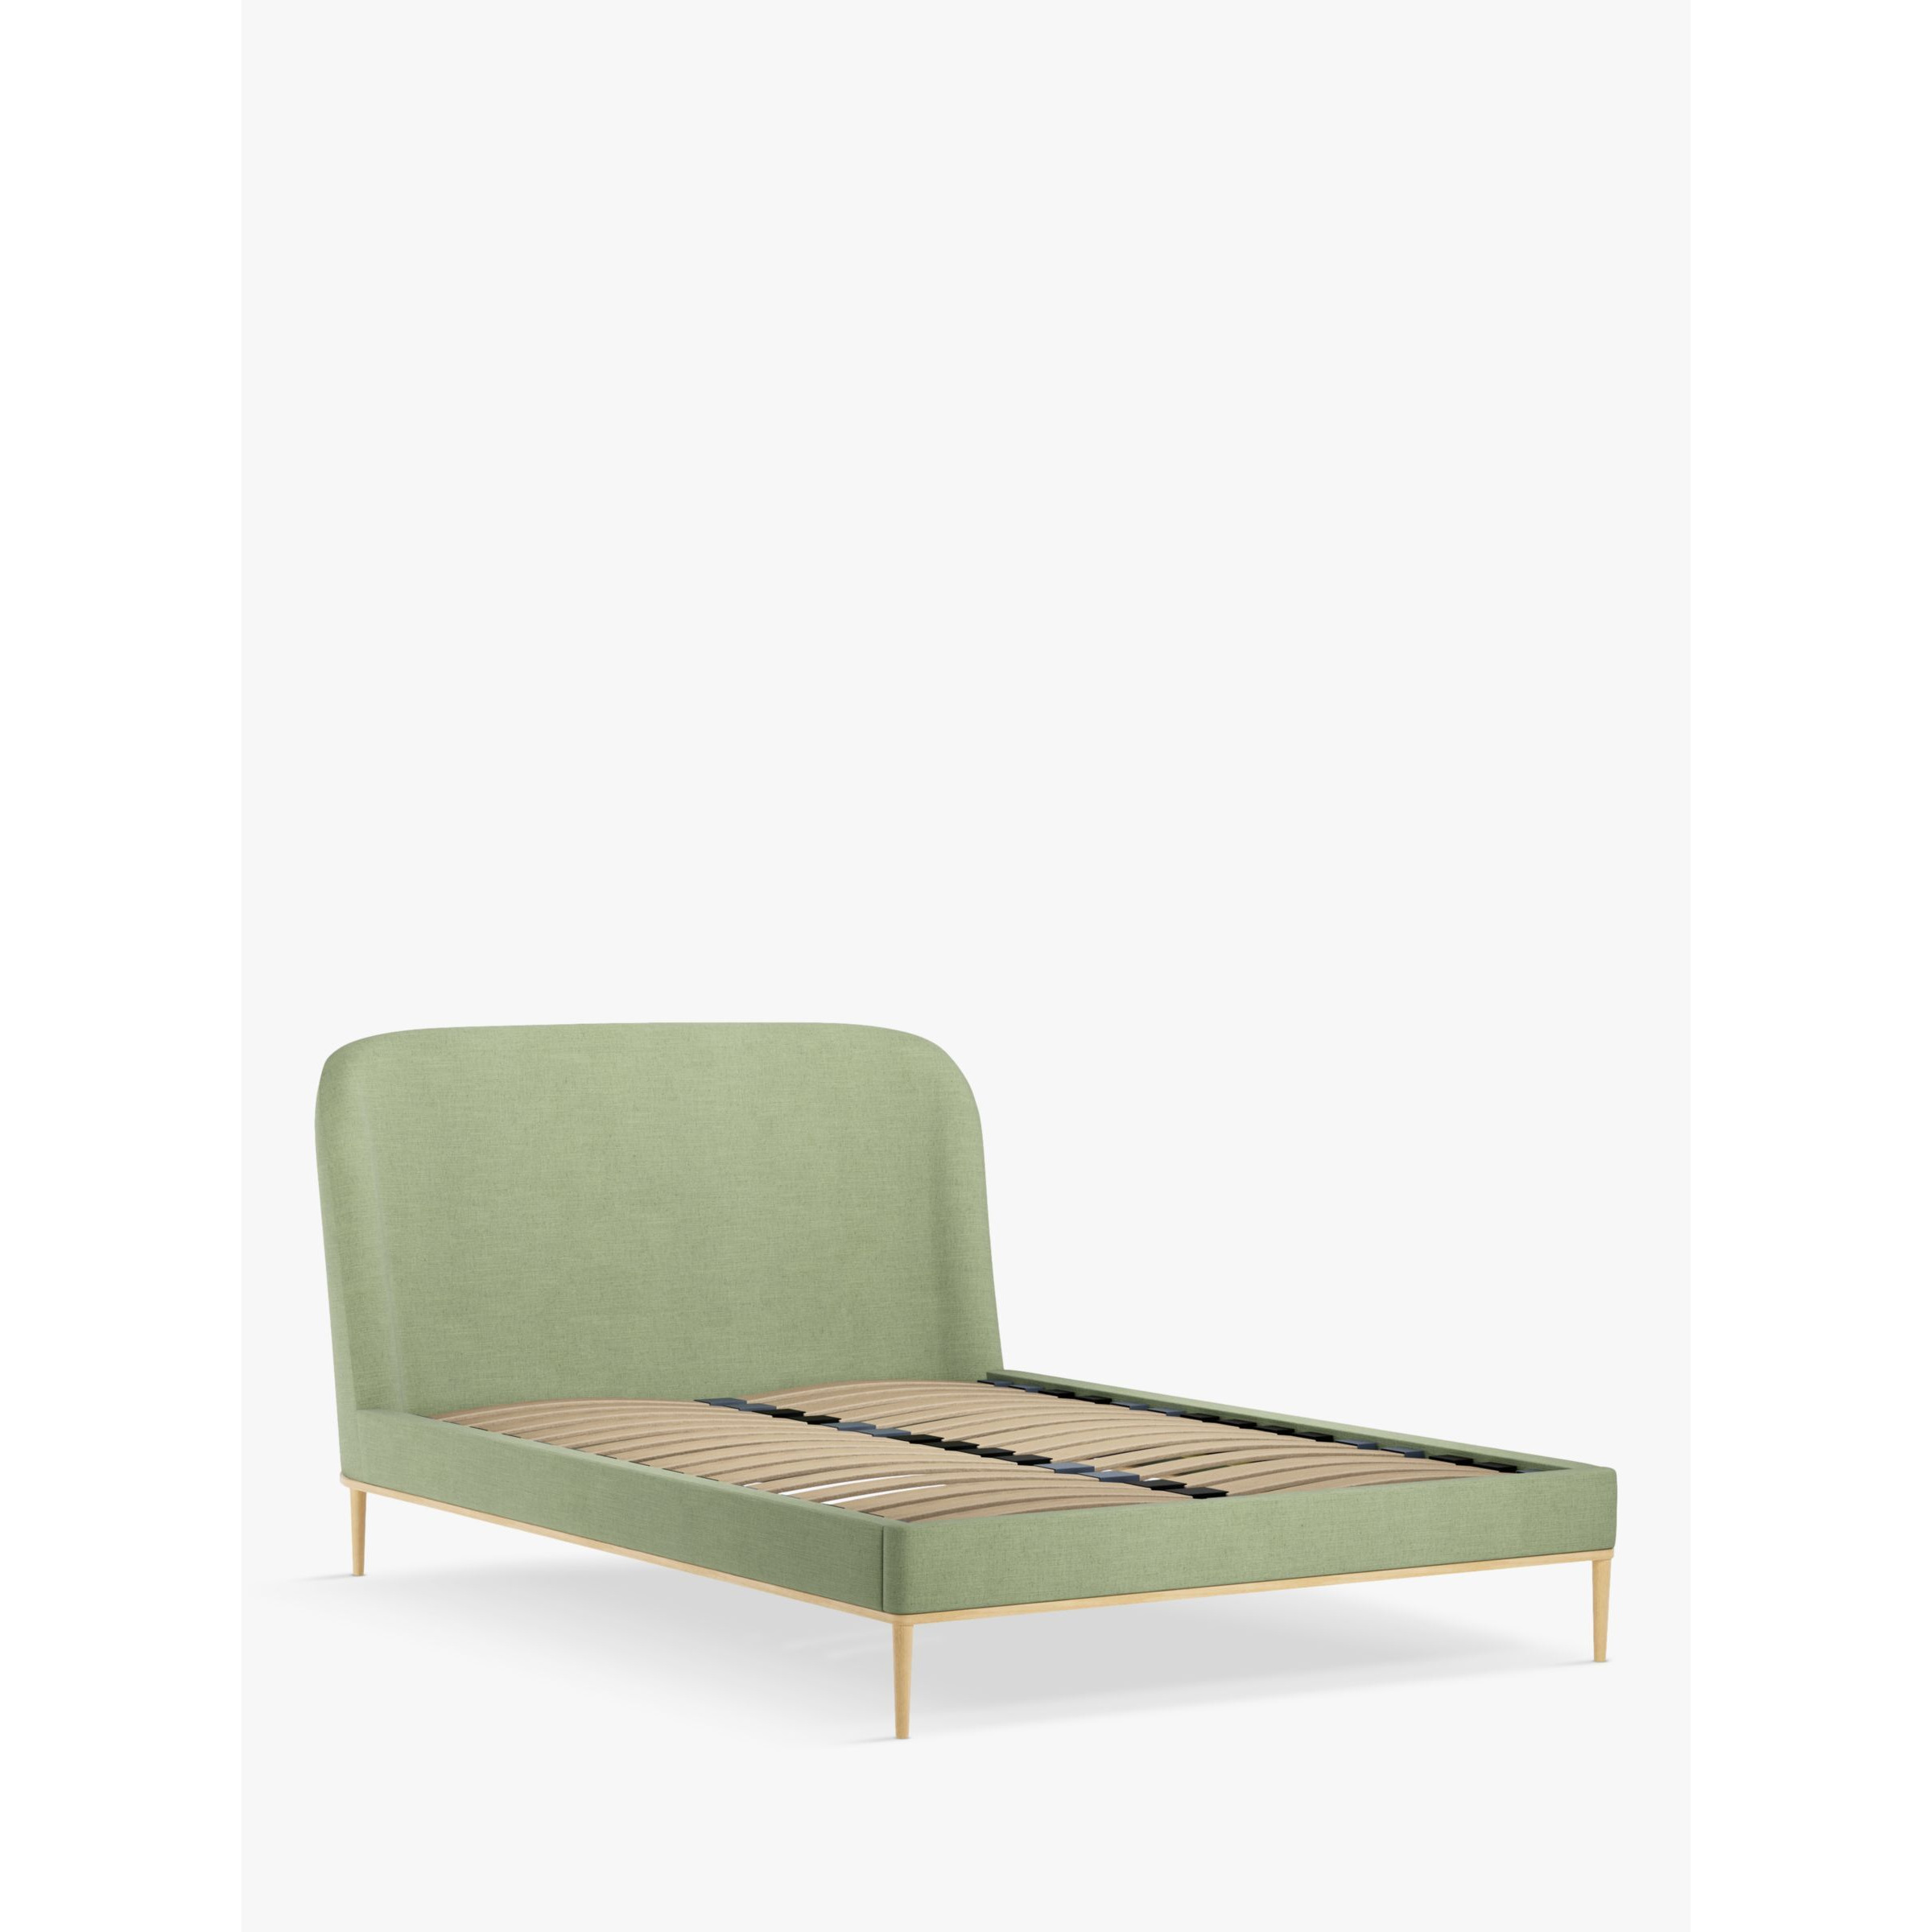 John Lewis Show-Wood Upholstered Bed Frame, Double - image 1